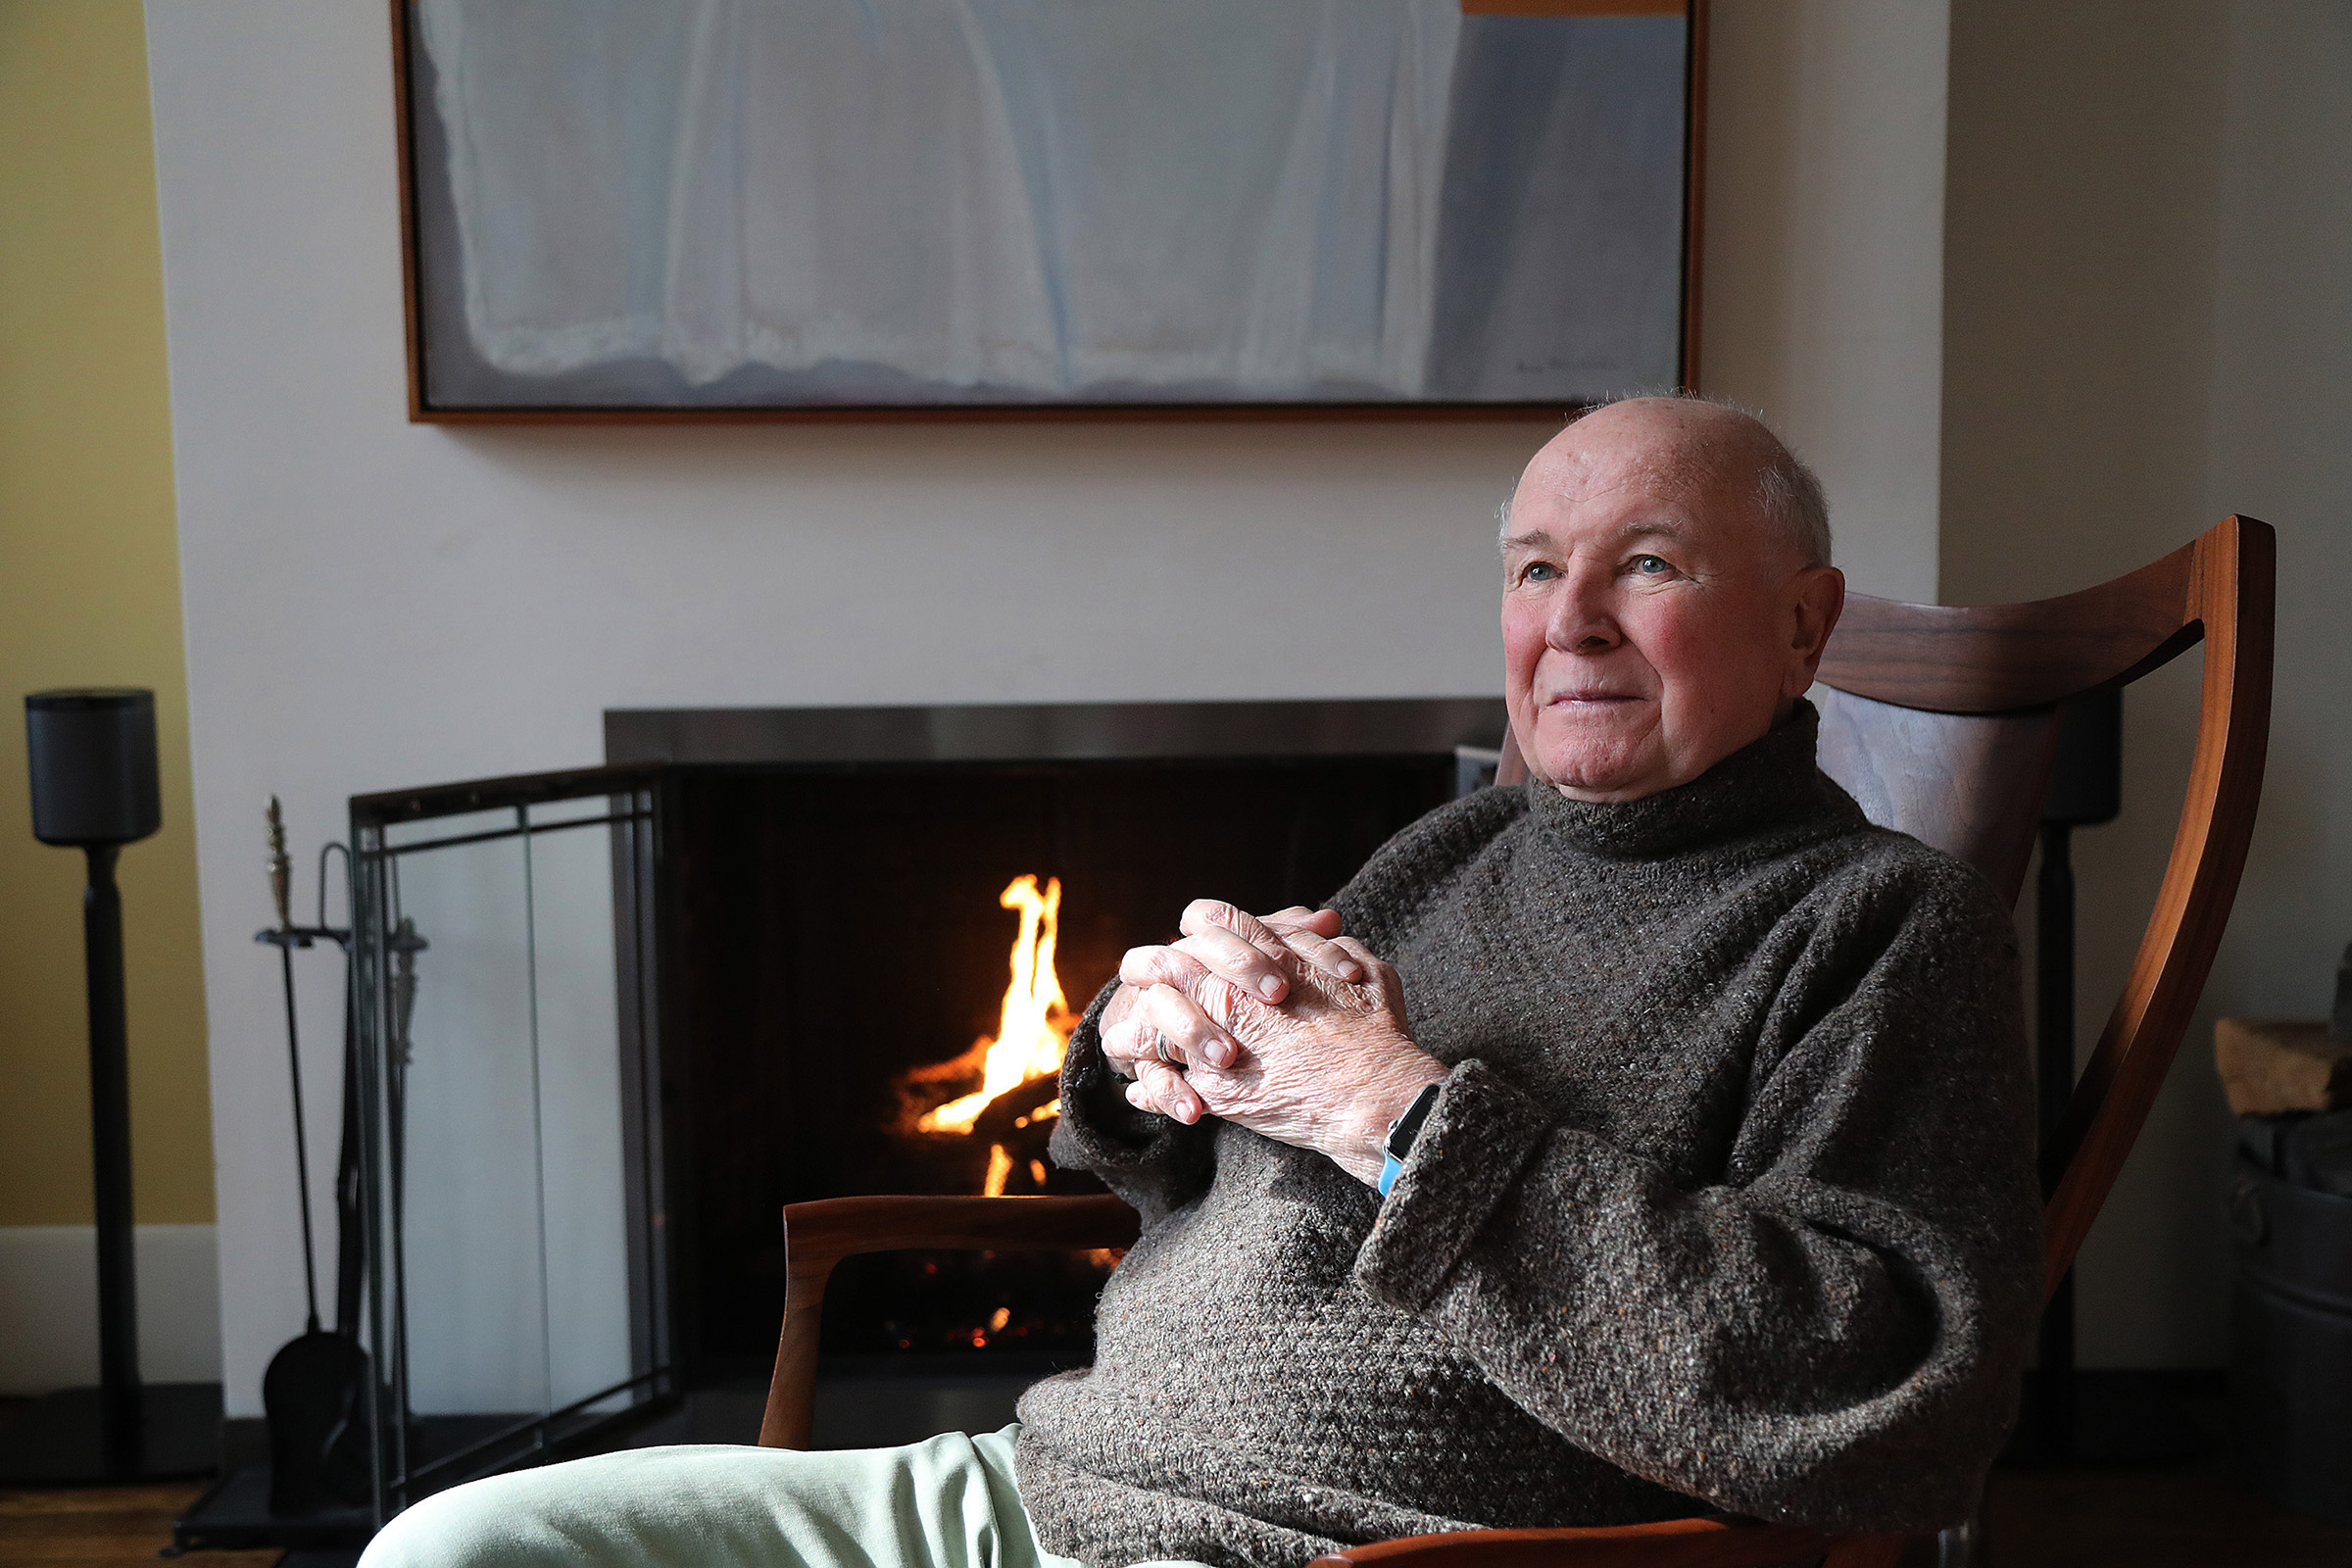 Playwright Terrence McNally in his home on March 2, 2020 in New York City.